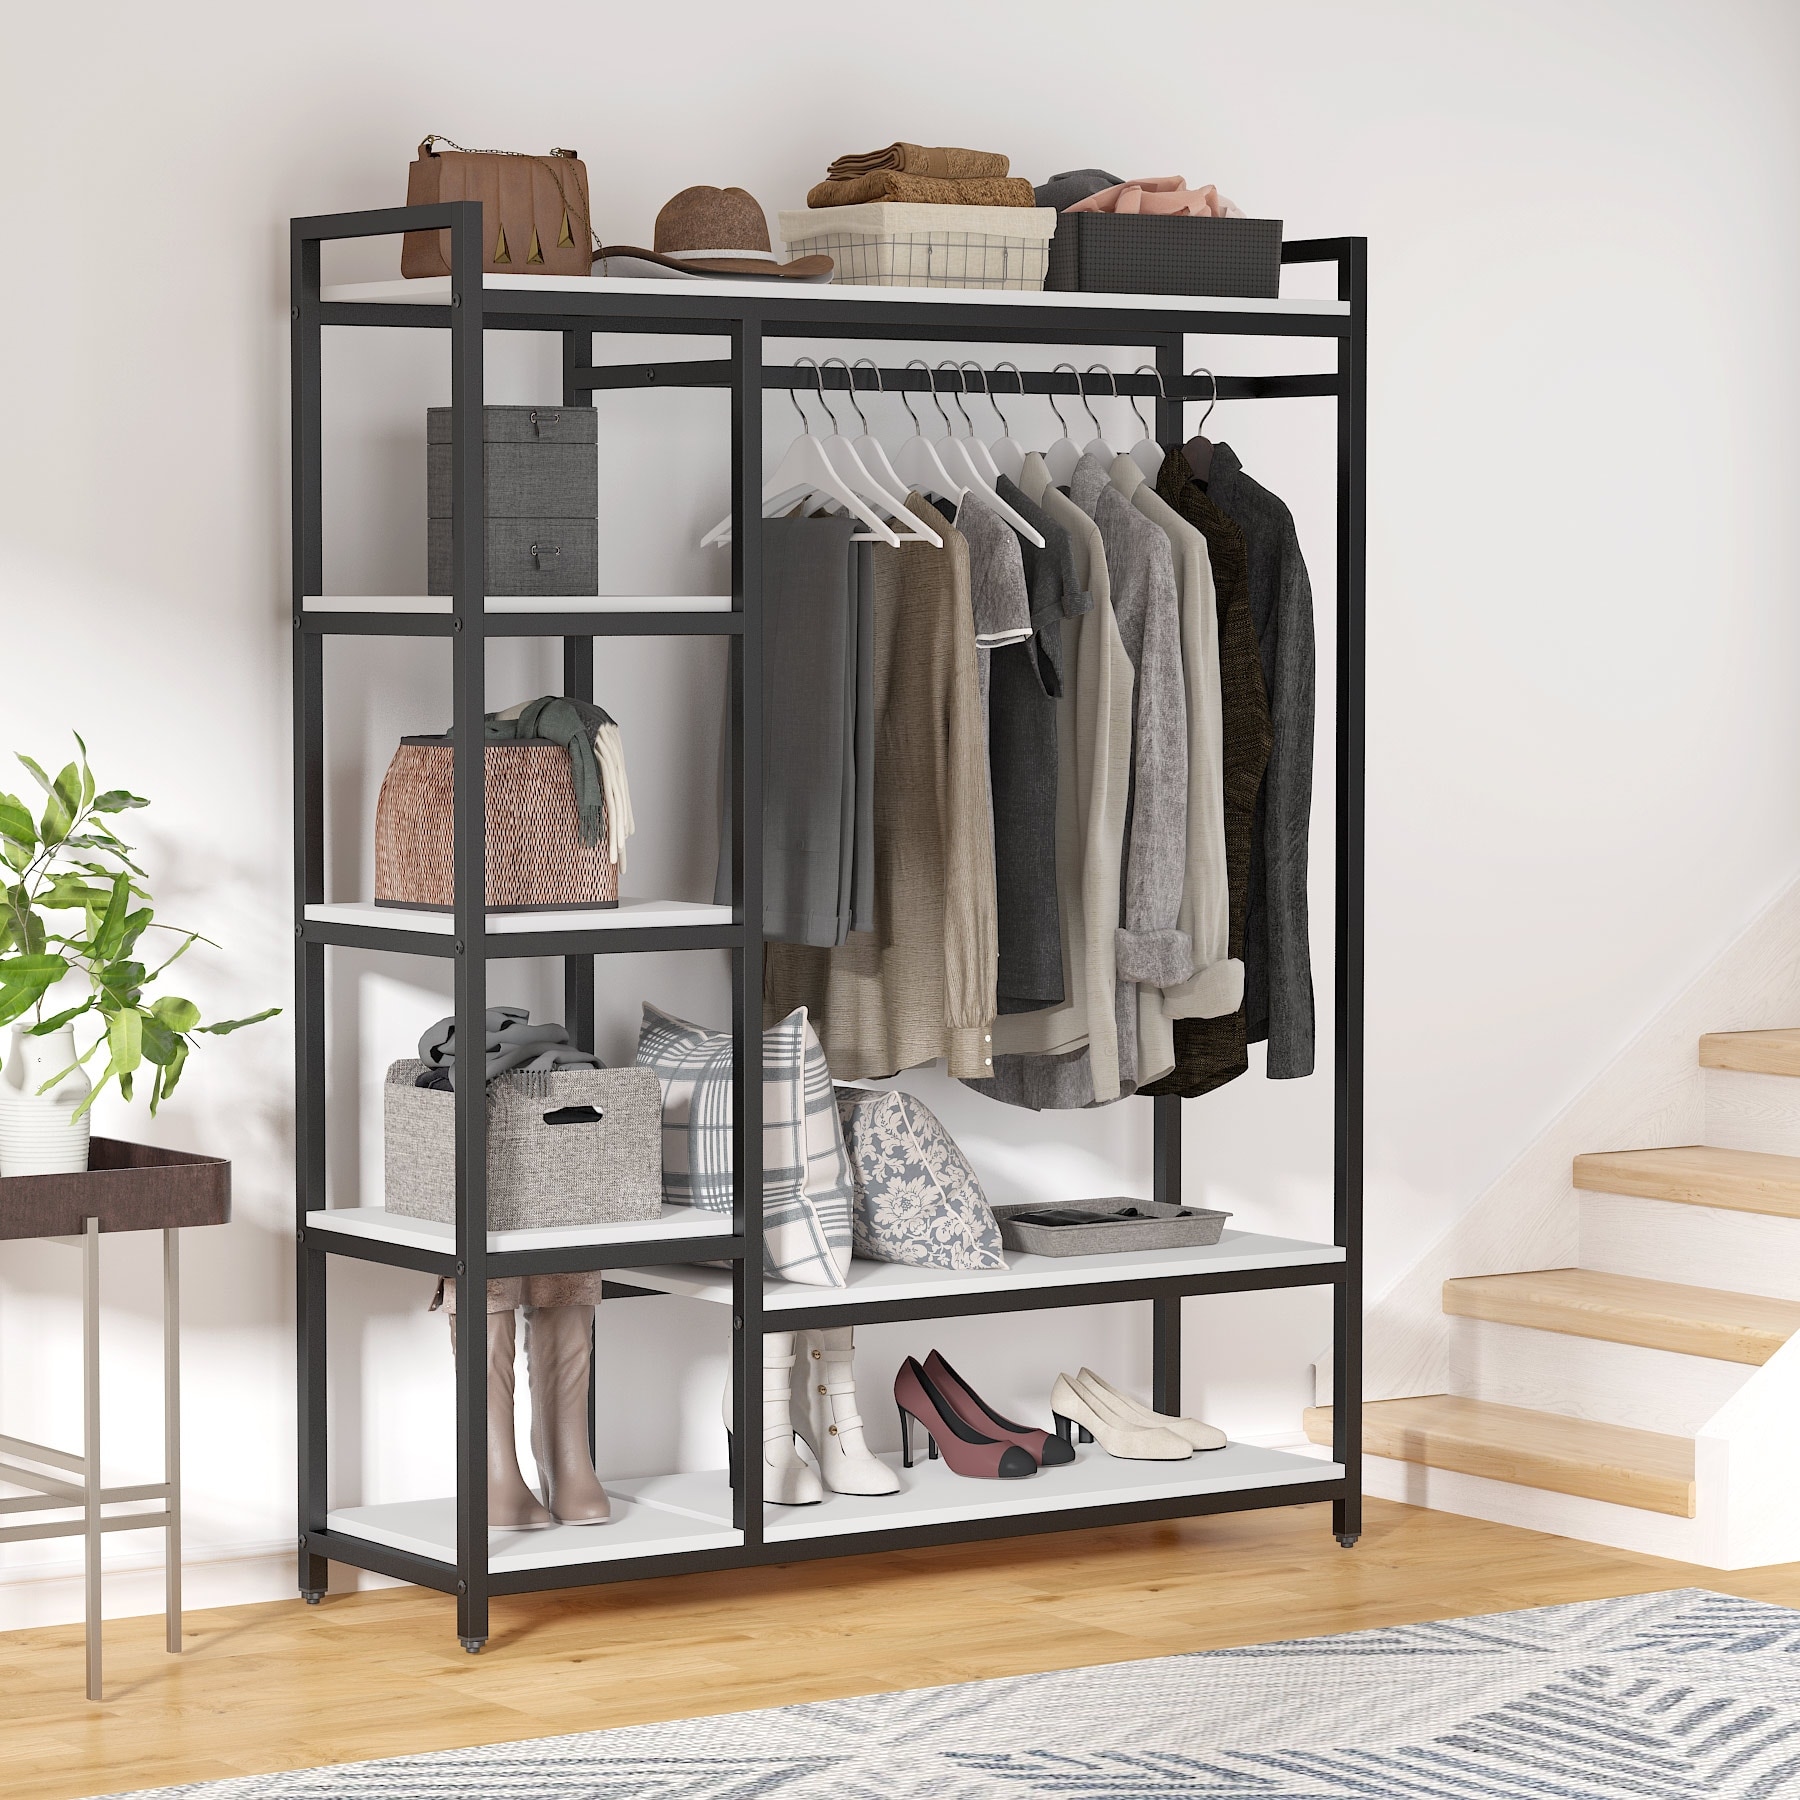 https://ak1.ostkcdn.com/images/products/is/images/direct/76b0915744711a4676bbe10ddb5adf1bb486cd8a/Free-standing-Closet-Organizer-Garment-Rack-with-6-Shelf-1-Hanging-Bar.jpg